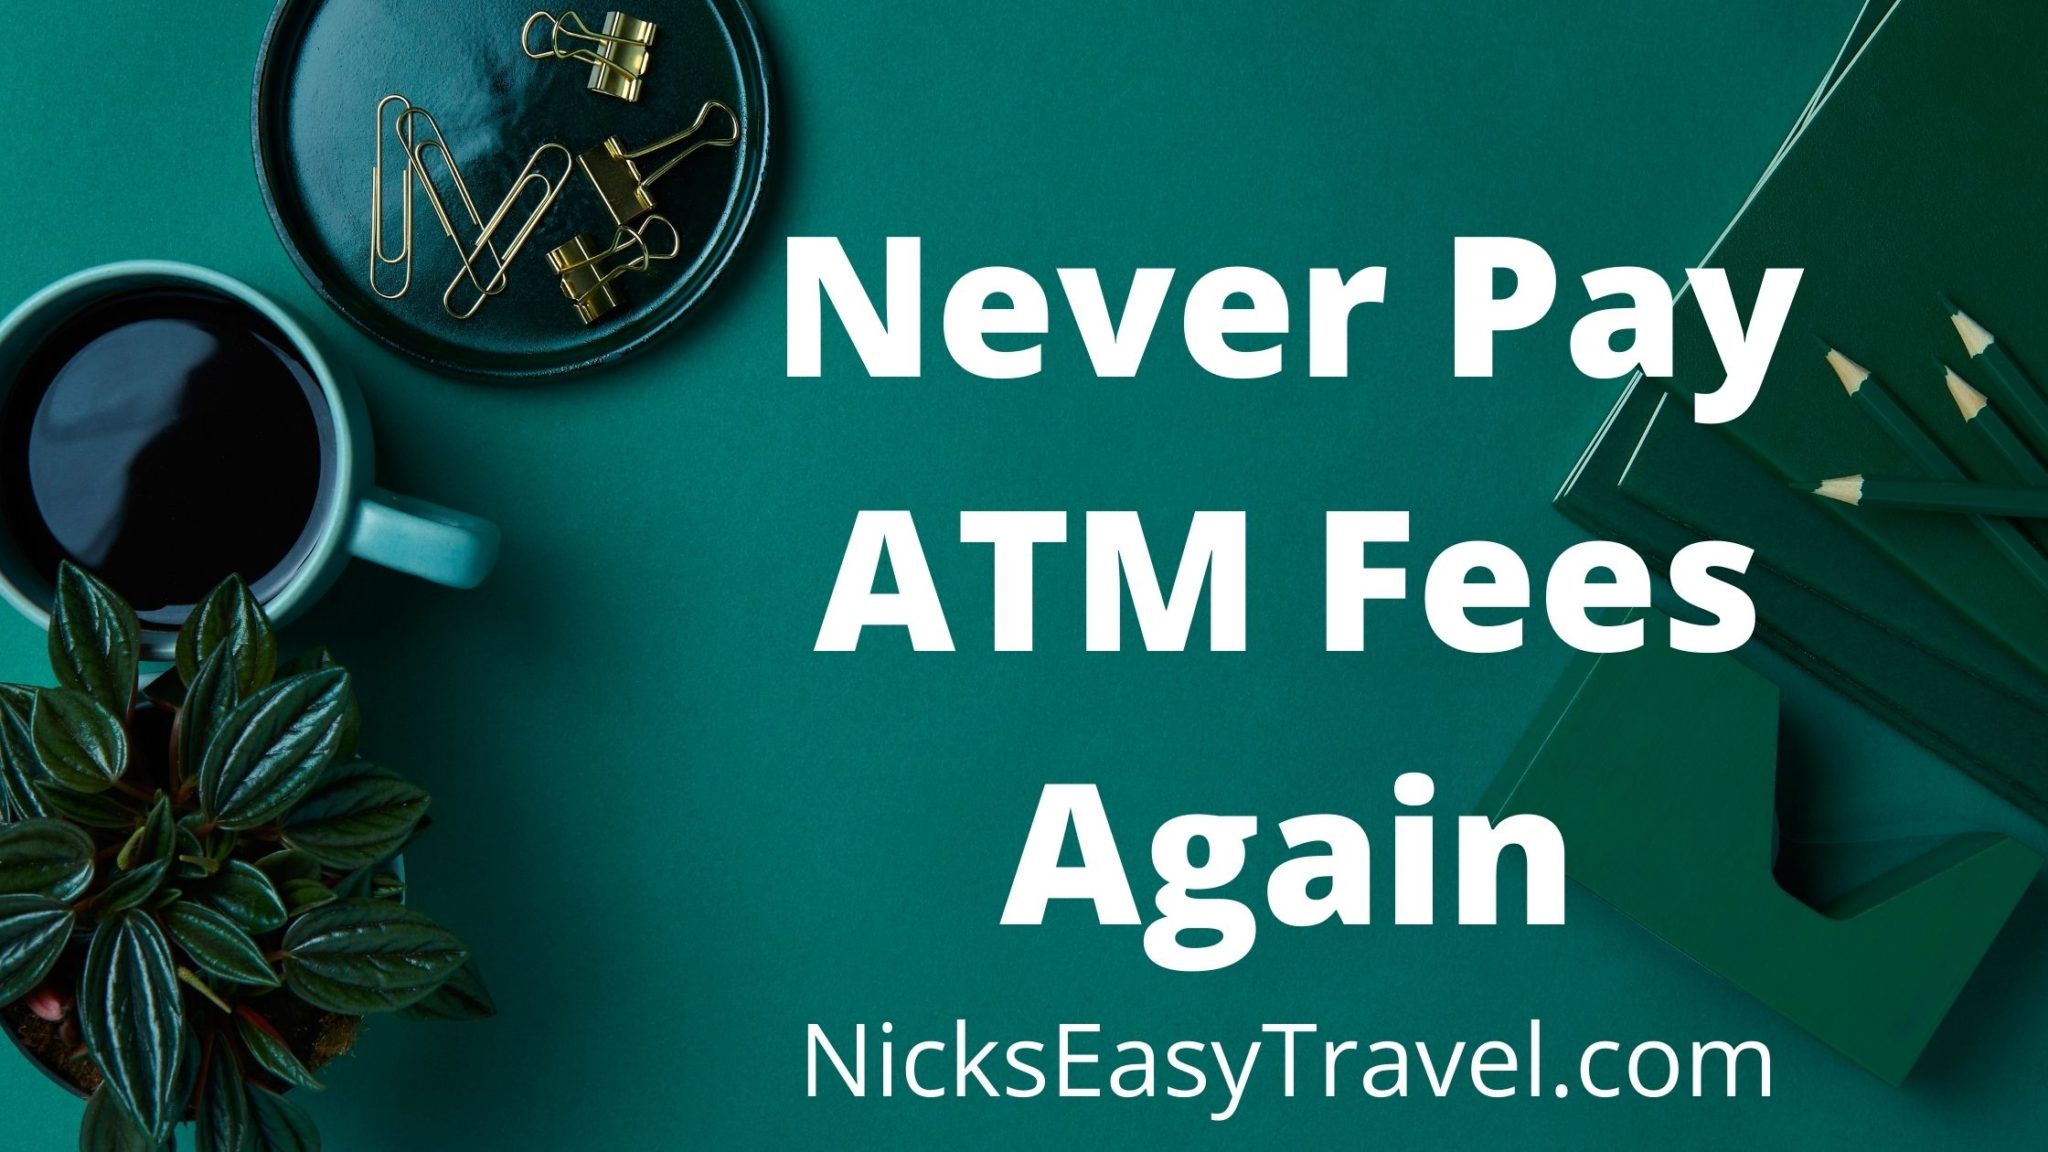 Never pay atm fees again use charles schwab atm card